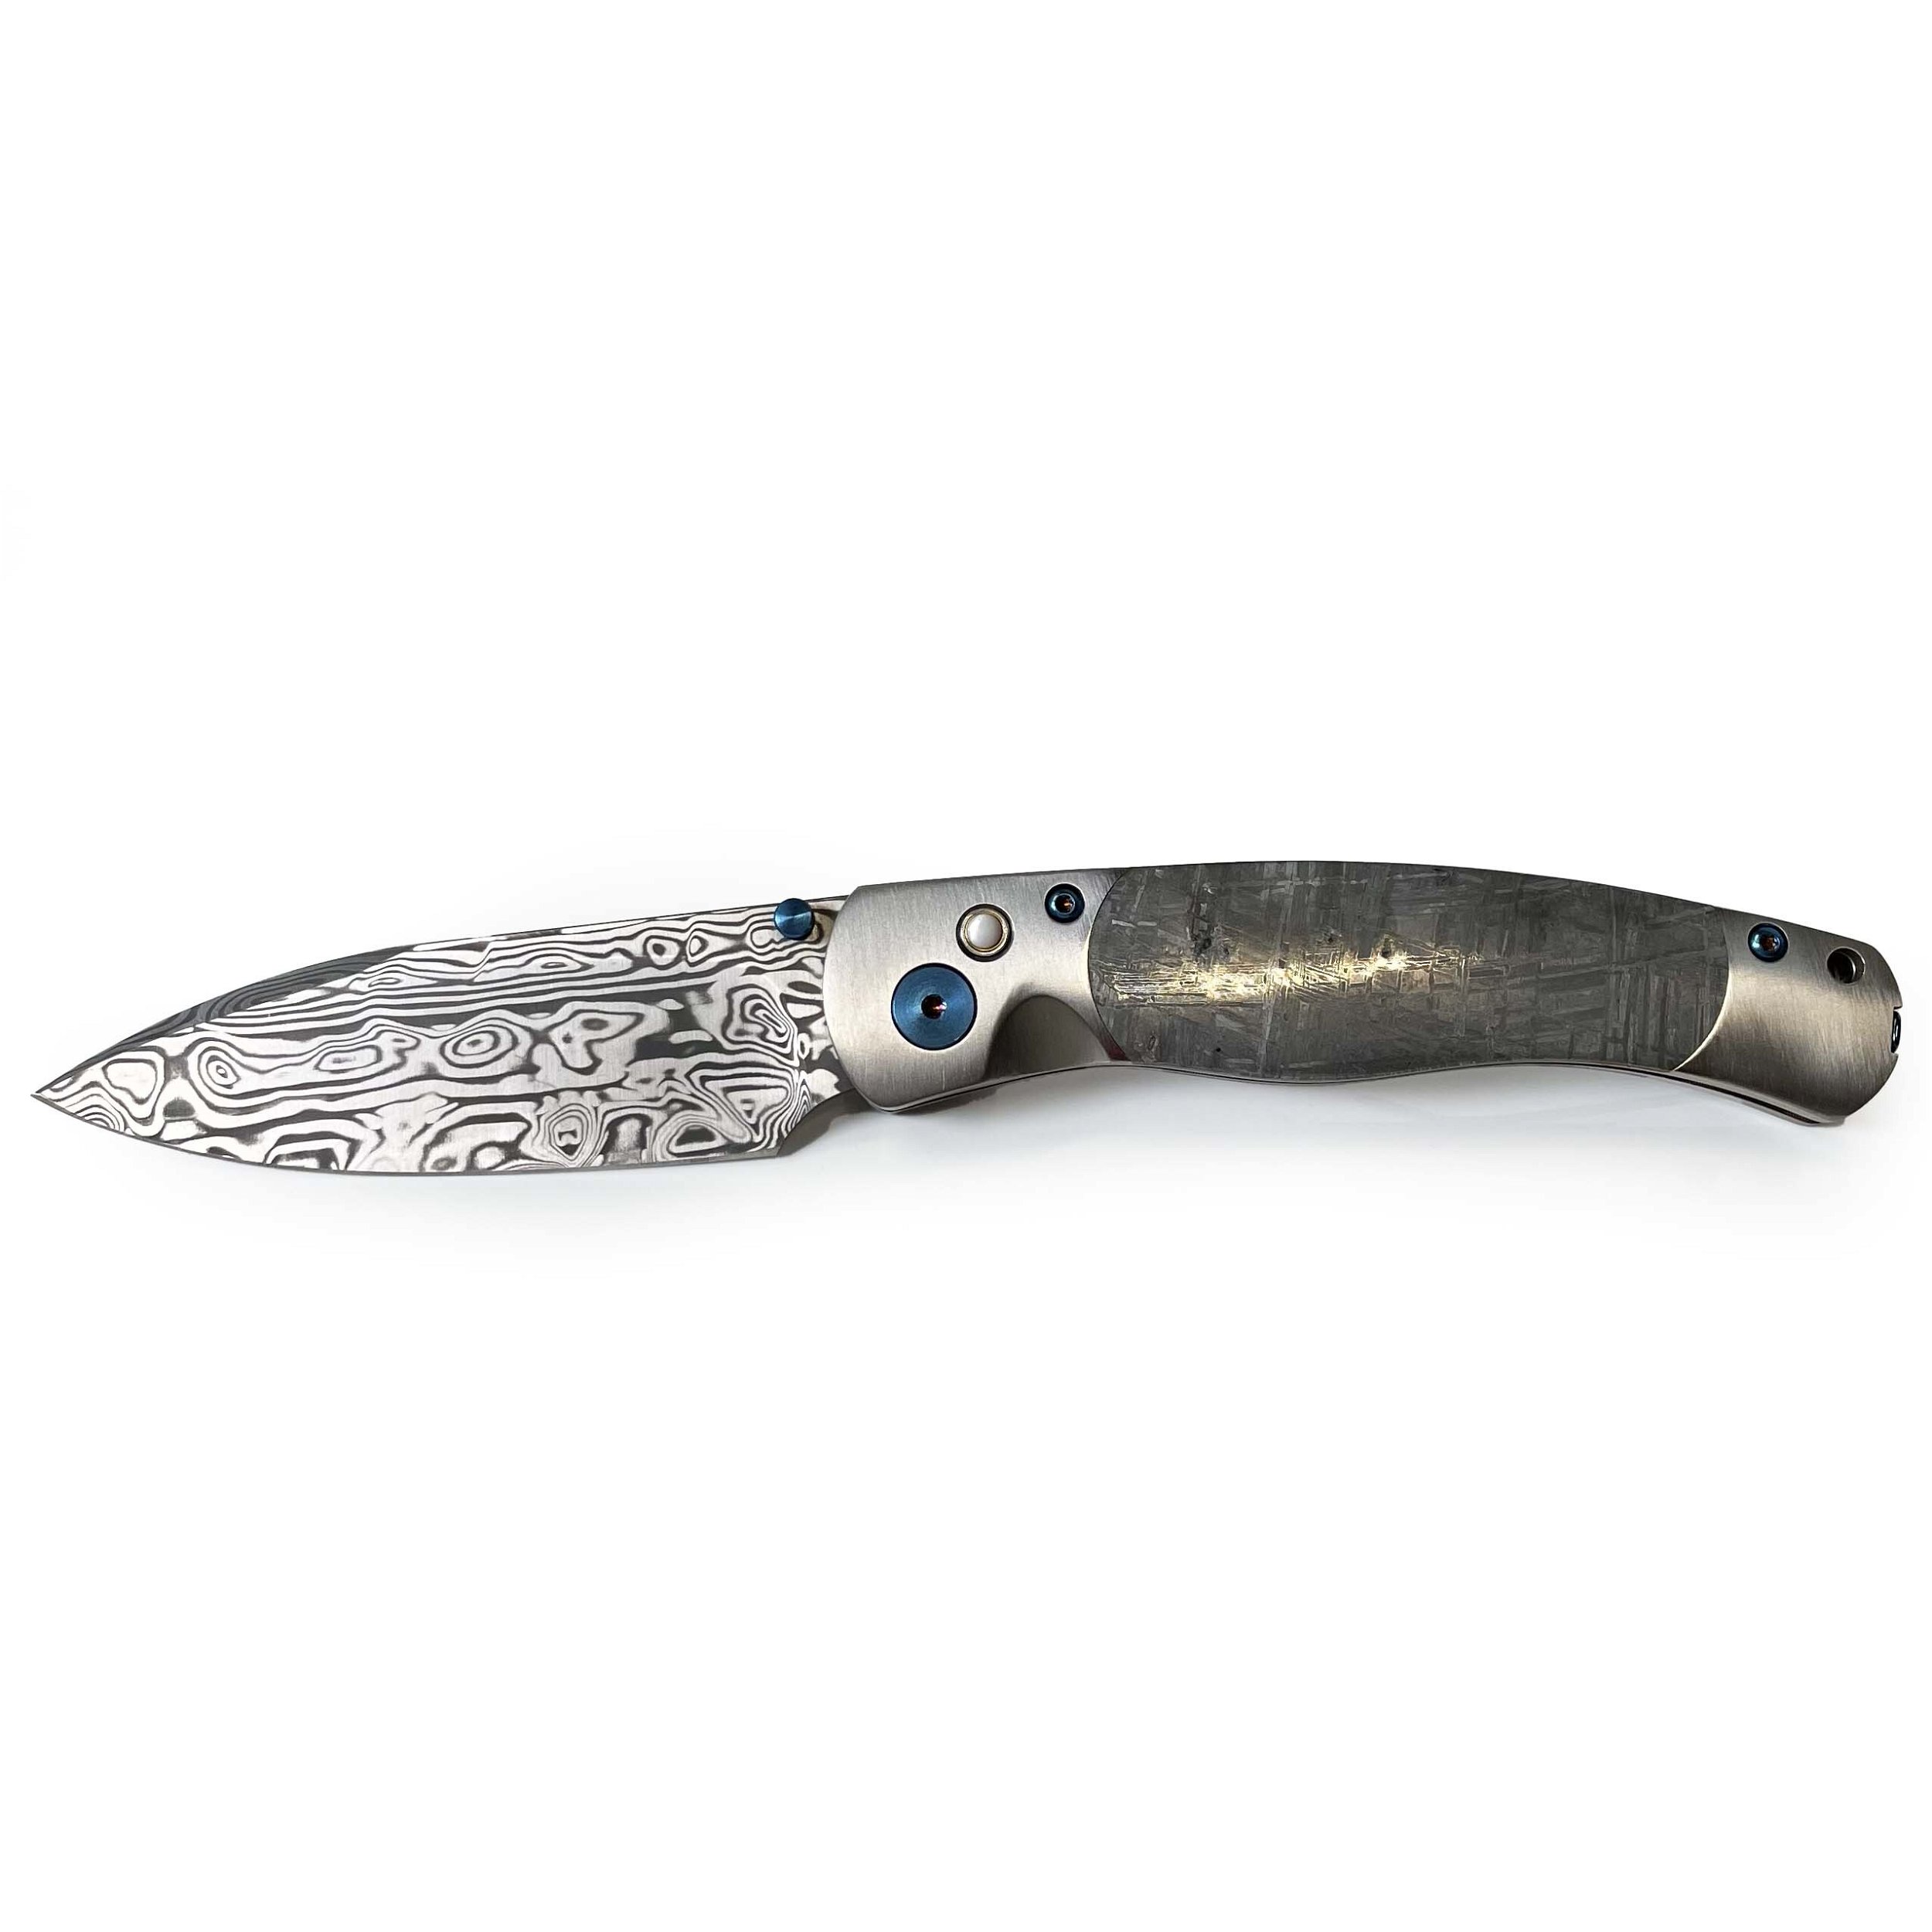 Munionalusta Meteorite Knife With Damascus Steel Blade and Blue Accents - Large